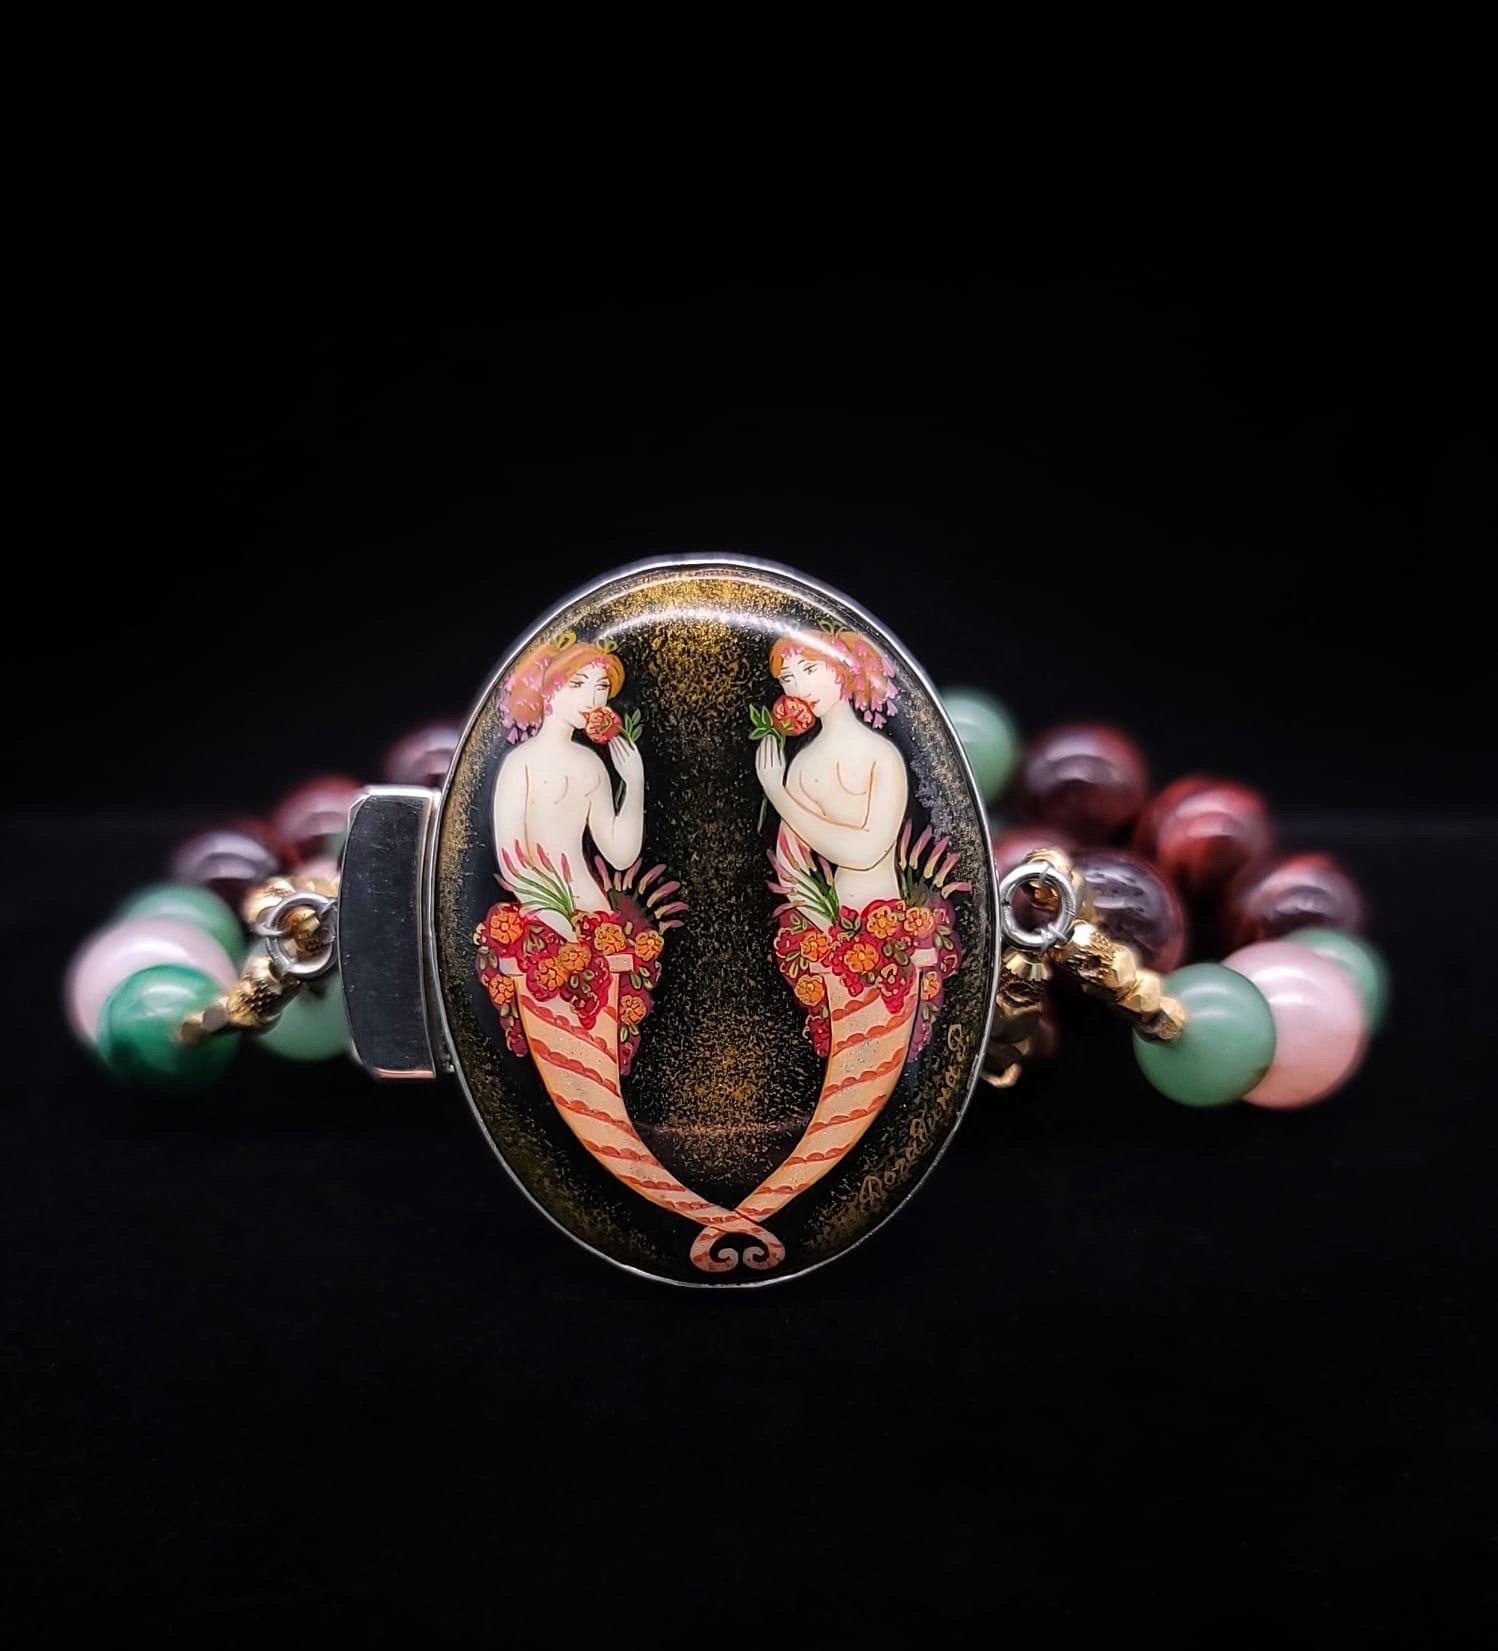 One-of-a-Kind

3 strand mixed red tiger’s eye, morganite, and green jade 10- 12 mm bead bracelet surrounds a hand-painted clasp. The clasp is Sterling silver and was painted in a Russian atelier by the same craftsman/ artists who provide the world